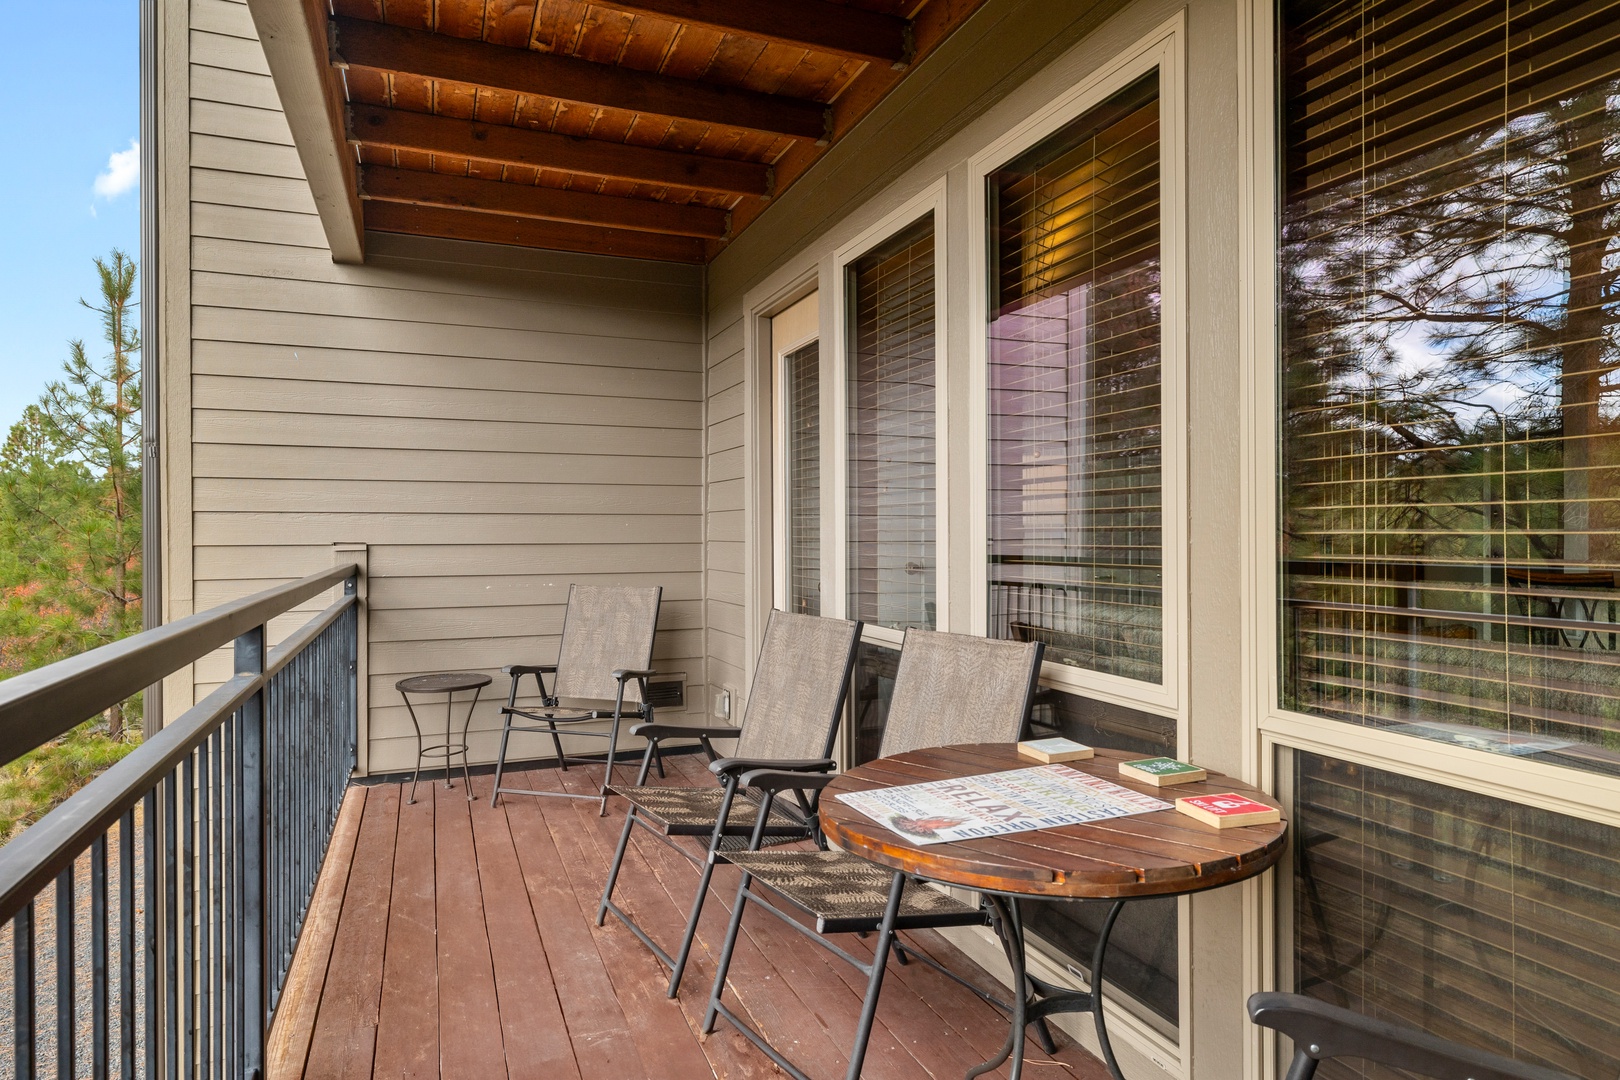 Unwind on the private back deck & take in the gorgeous scenery